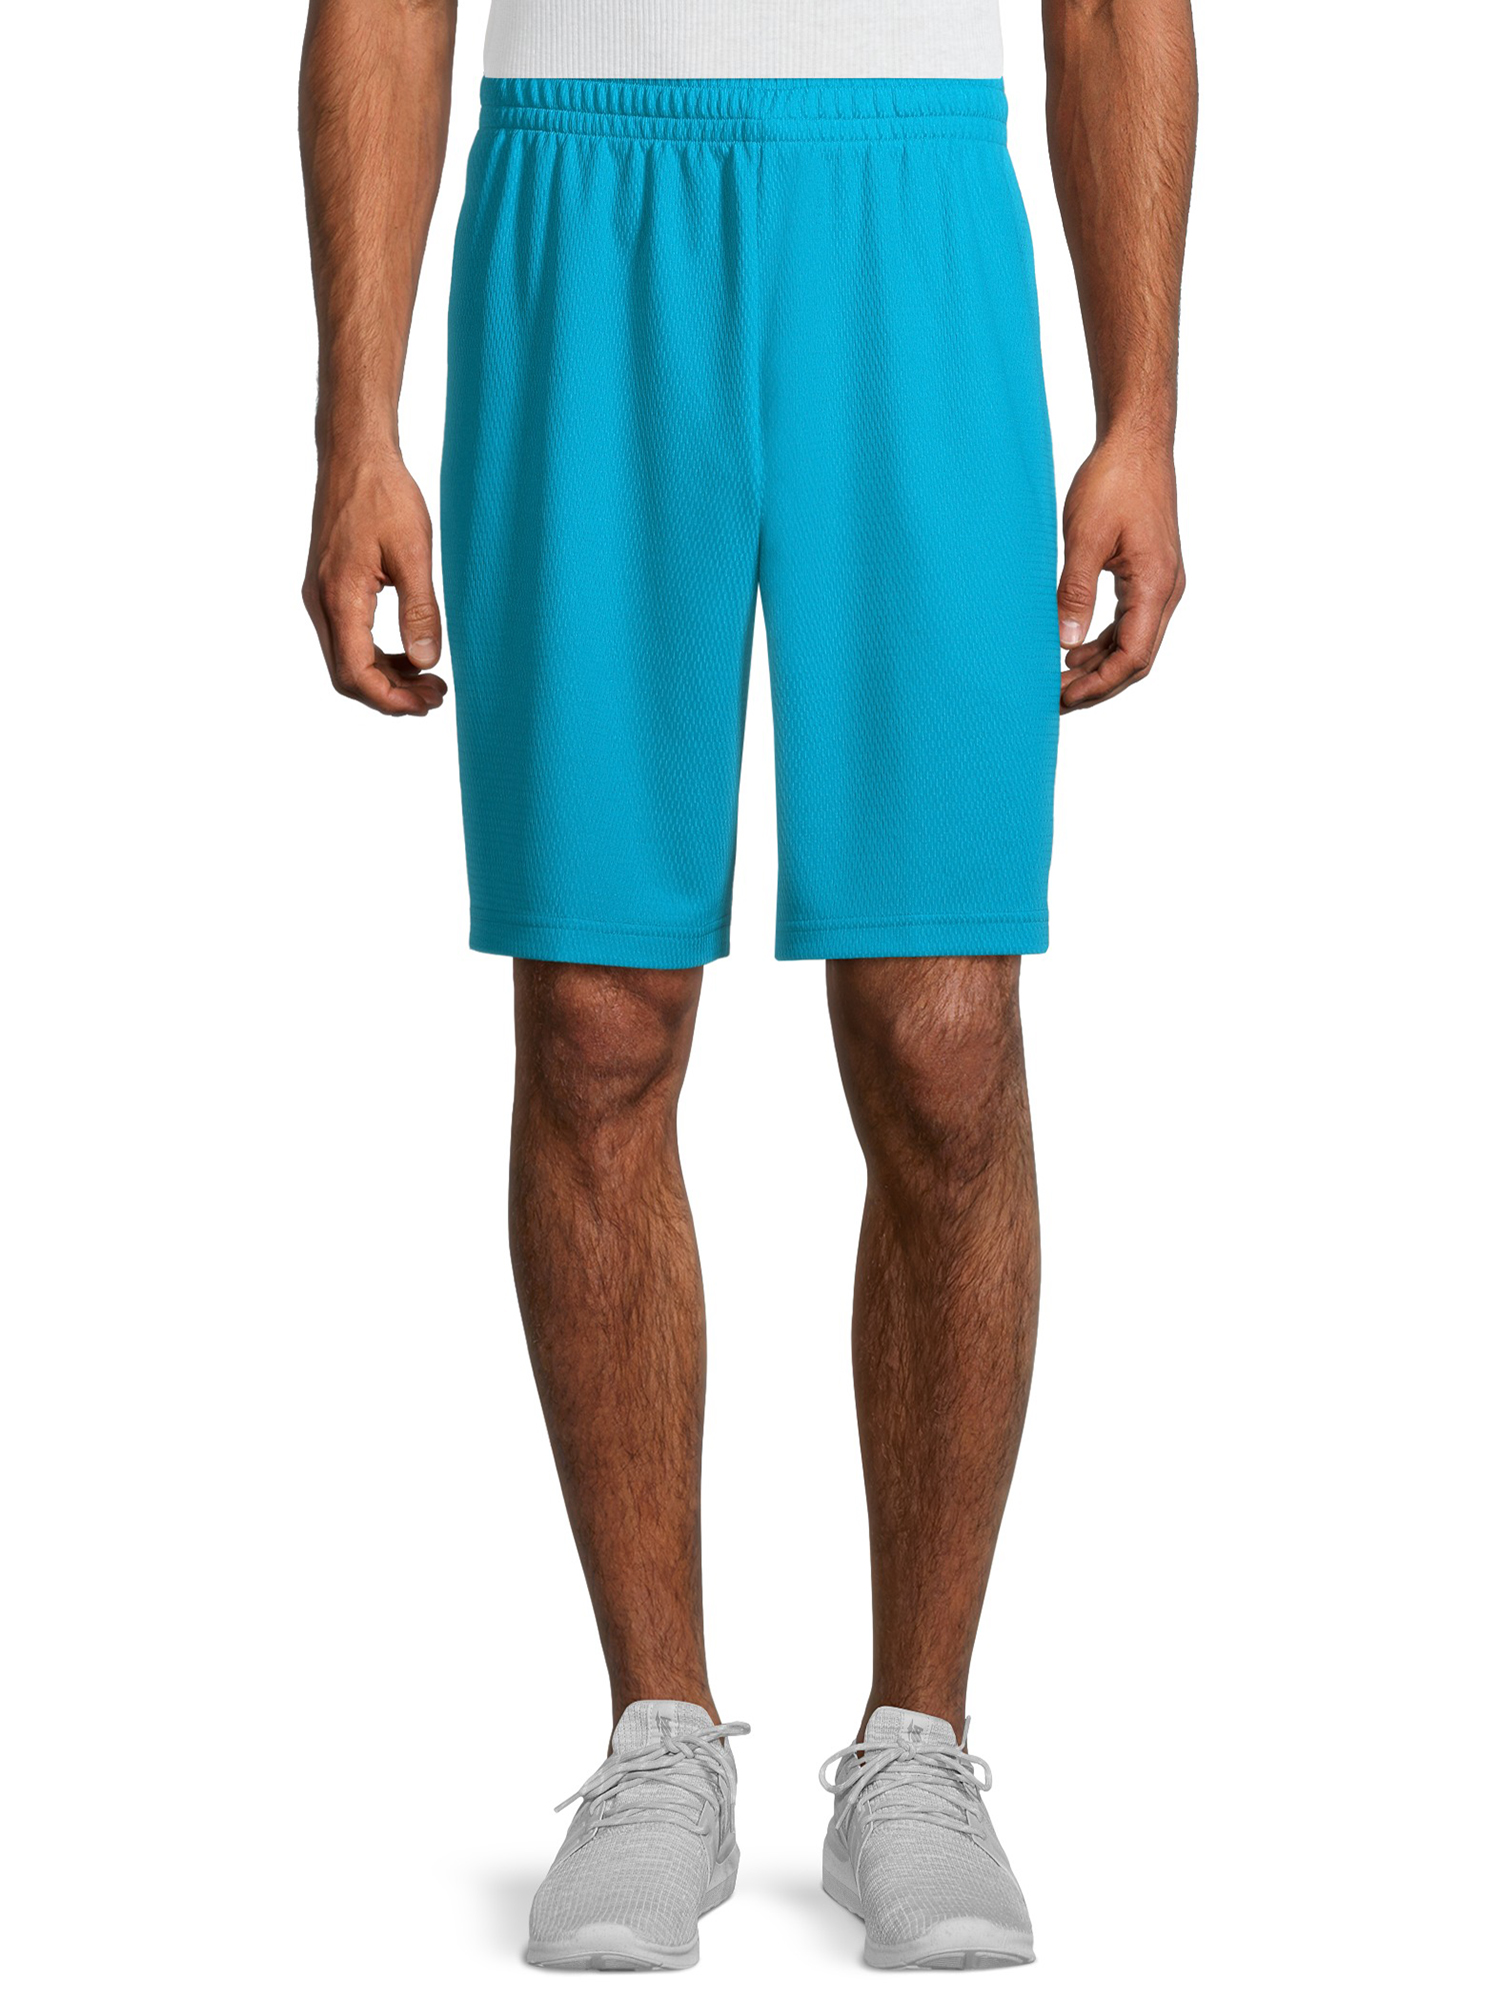 Athletic Works Men's and Big Men's Active Mesh Shorts, 9" Inseam, Sizes XS-5XL - image 1 of 2